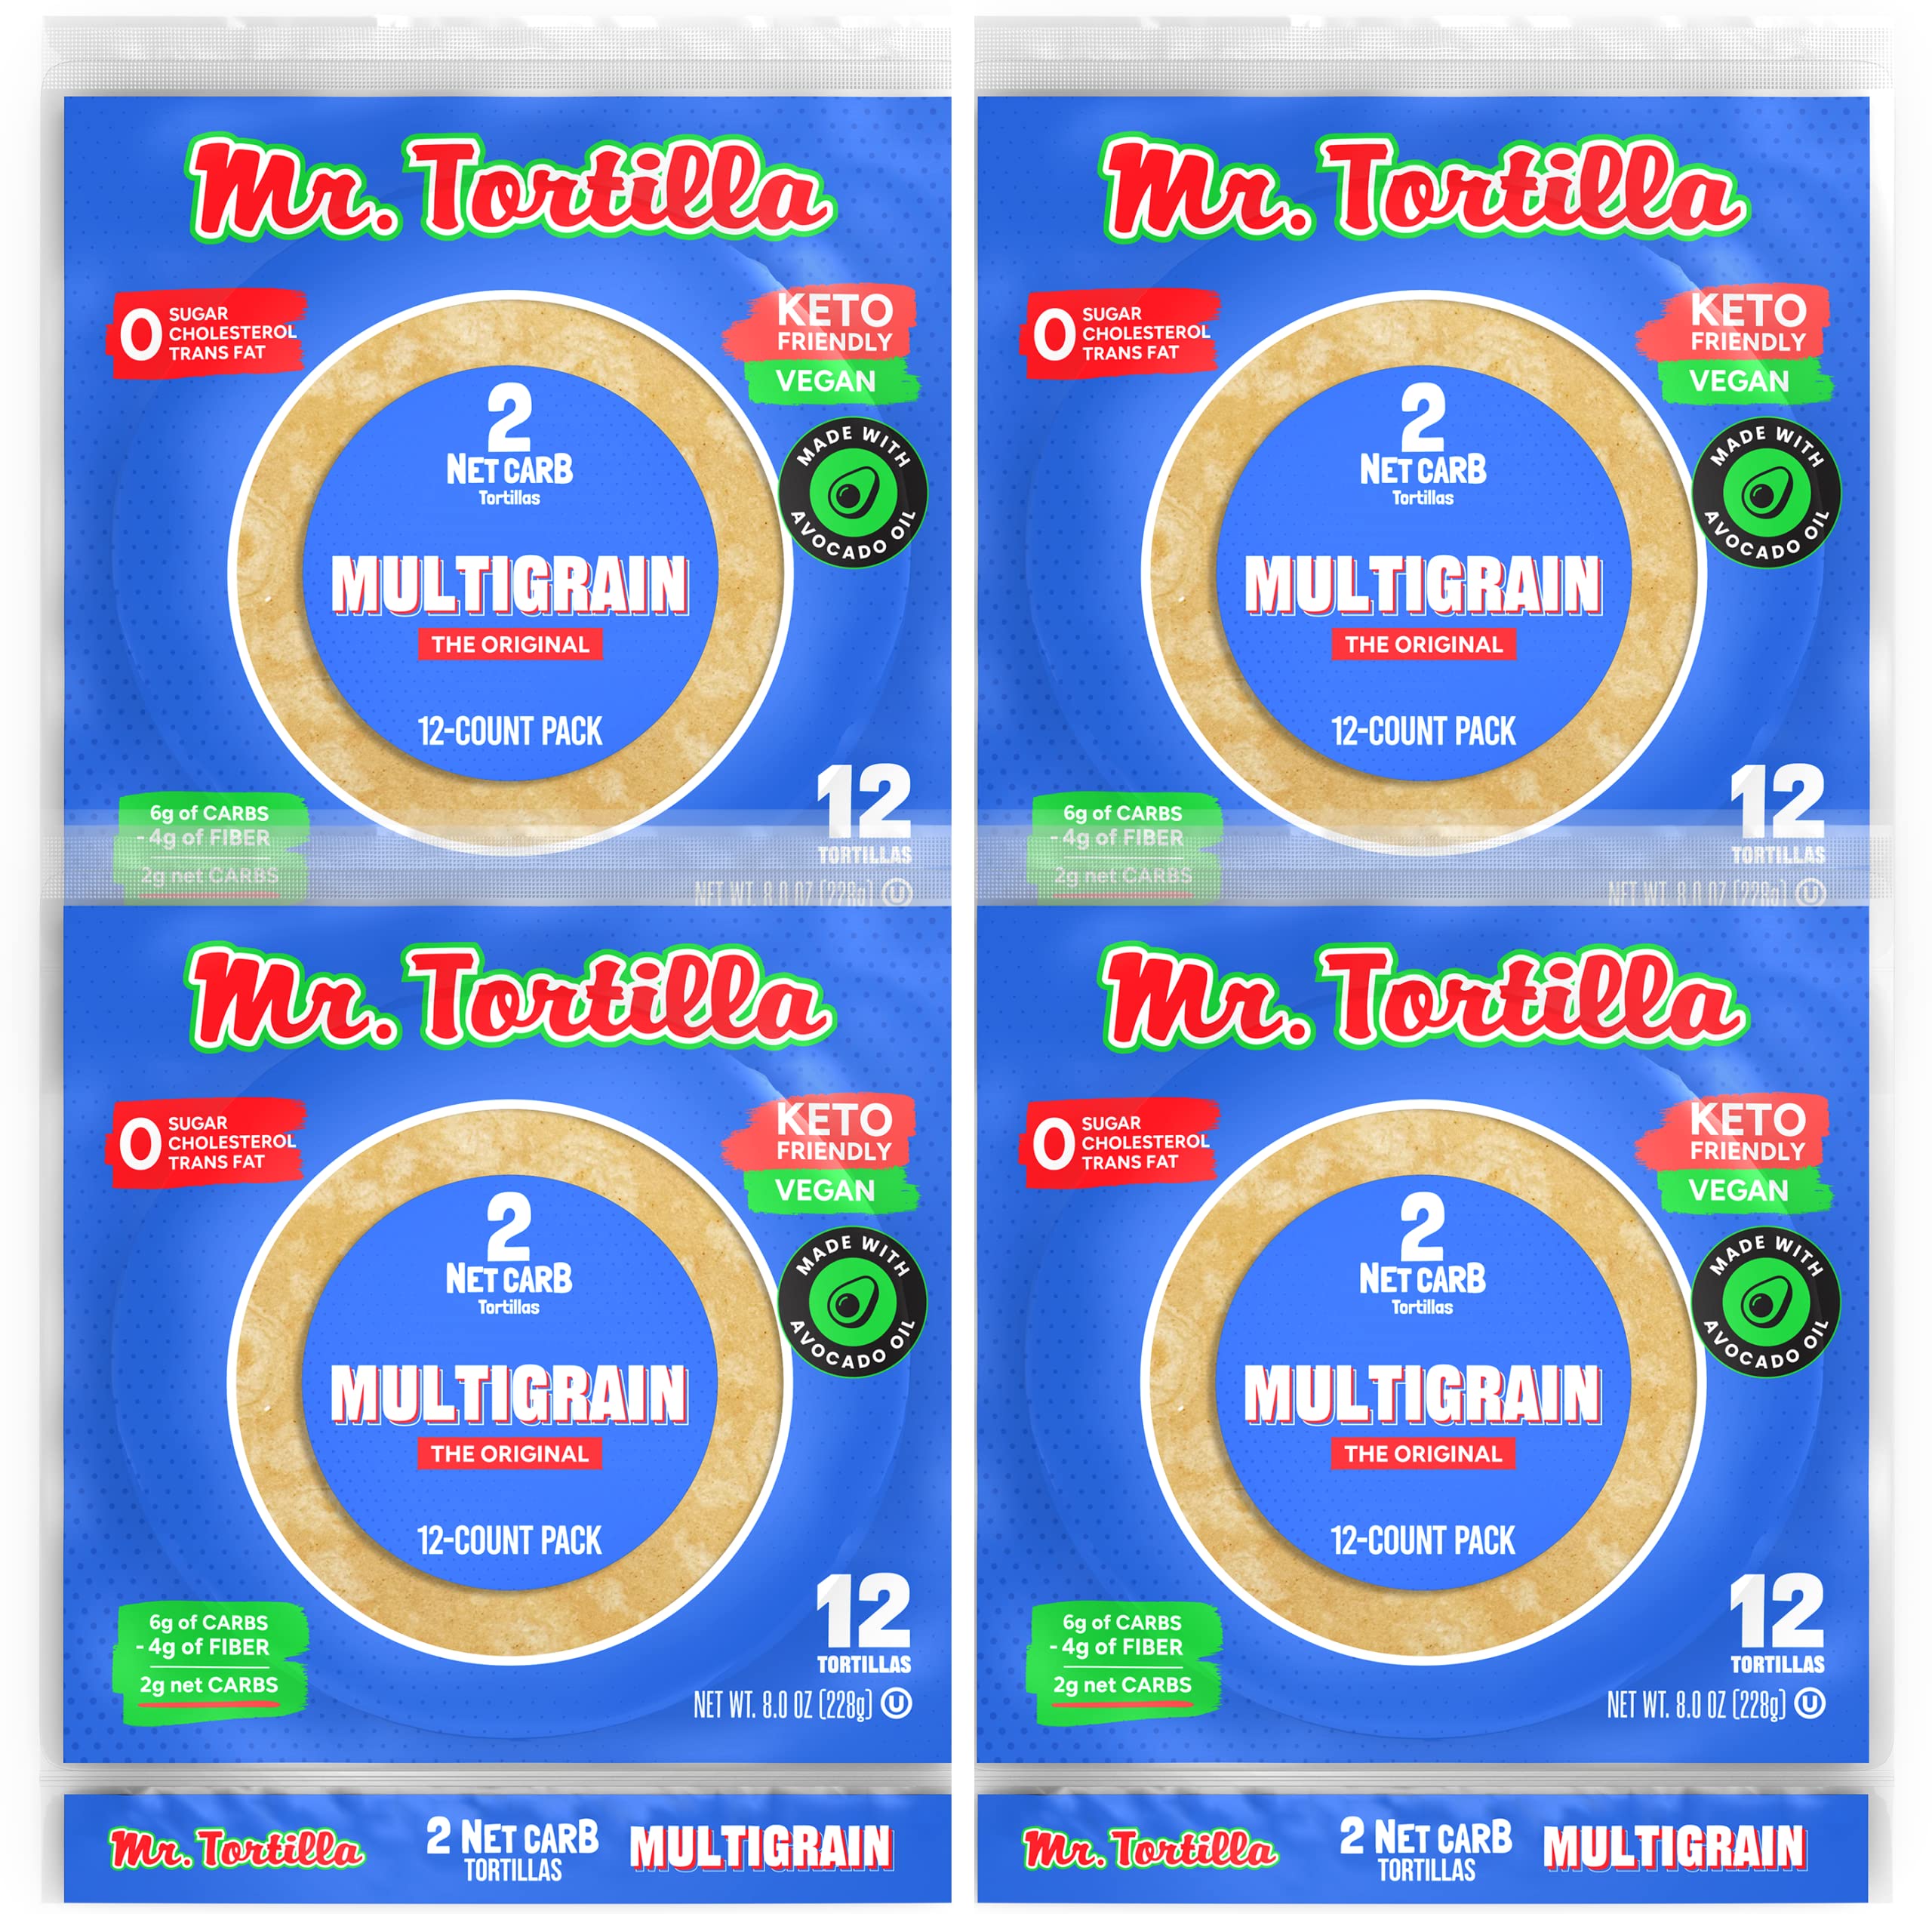 Mr. Tortilla World's Only 15 Calorie, 1 Net Carb Tortilla Wraps (48 Tortillas) | Keto, Low Carb, Low Calorie, Vegan, Kosher | (Multigrain)~$17.52 @ Amazon~Free Prime Shipping!